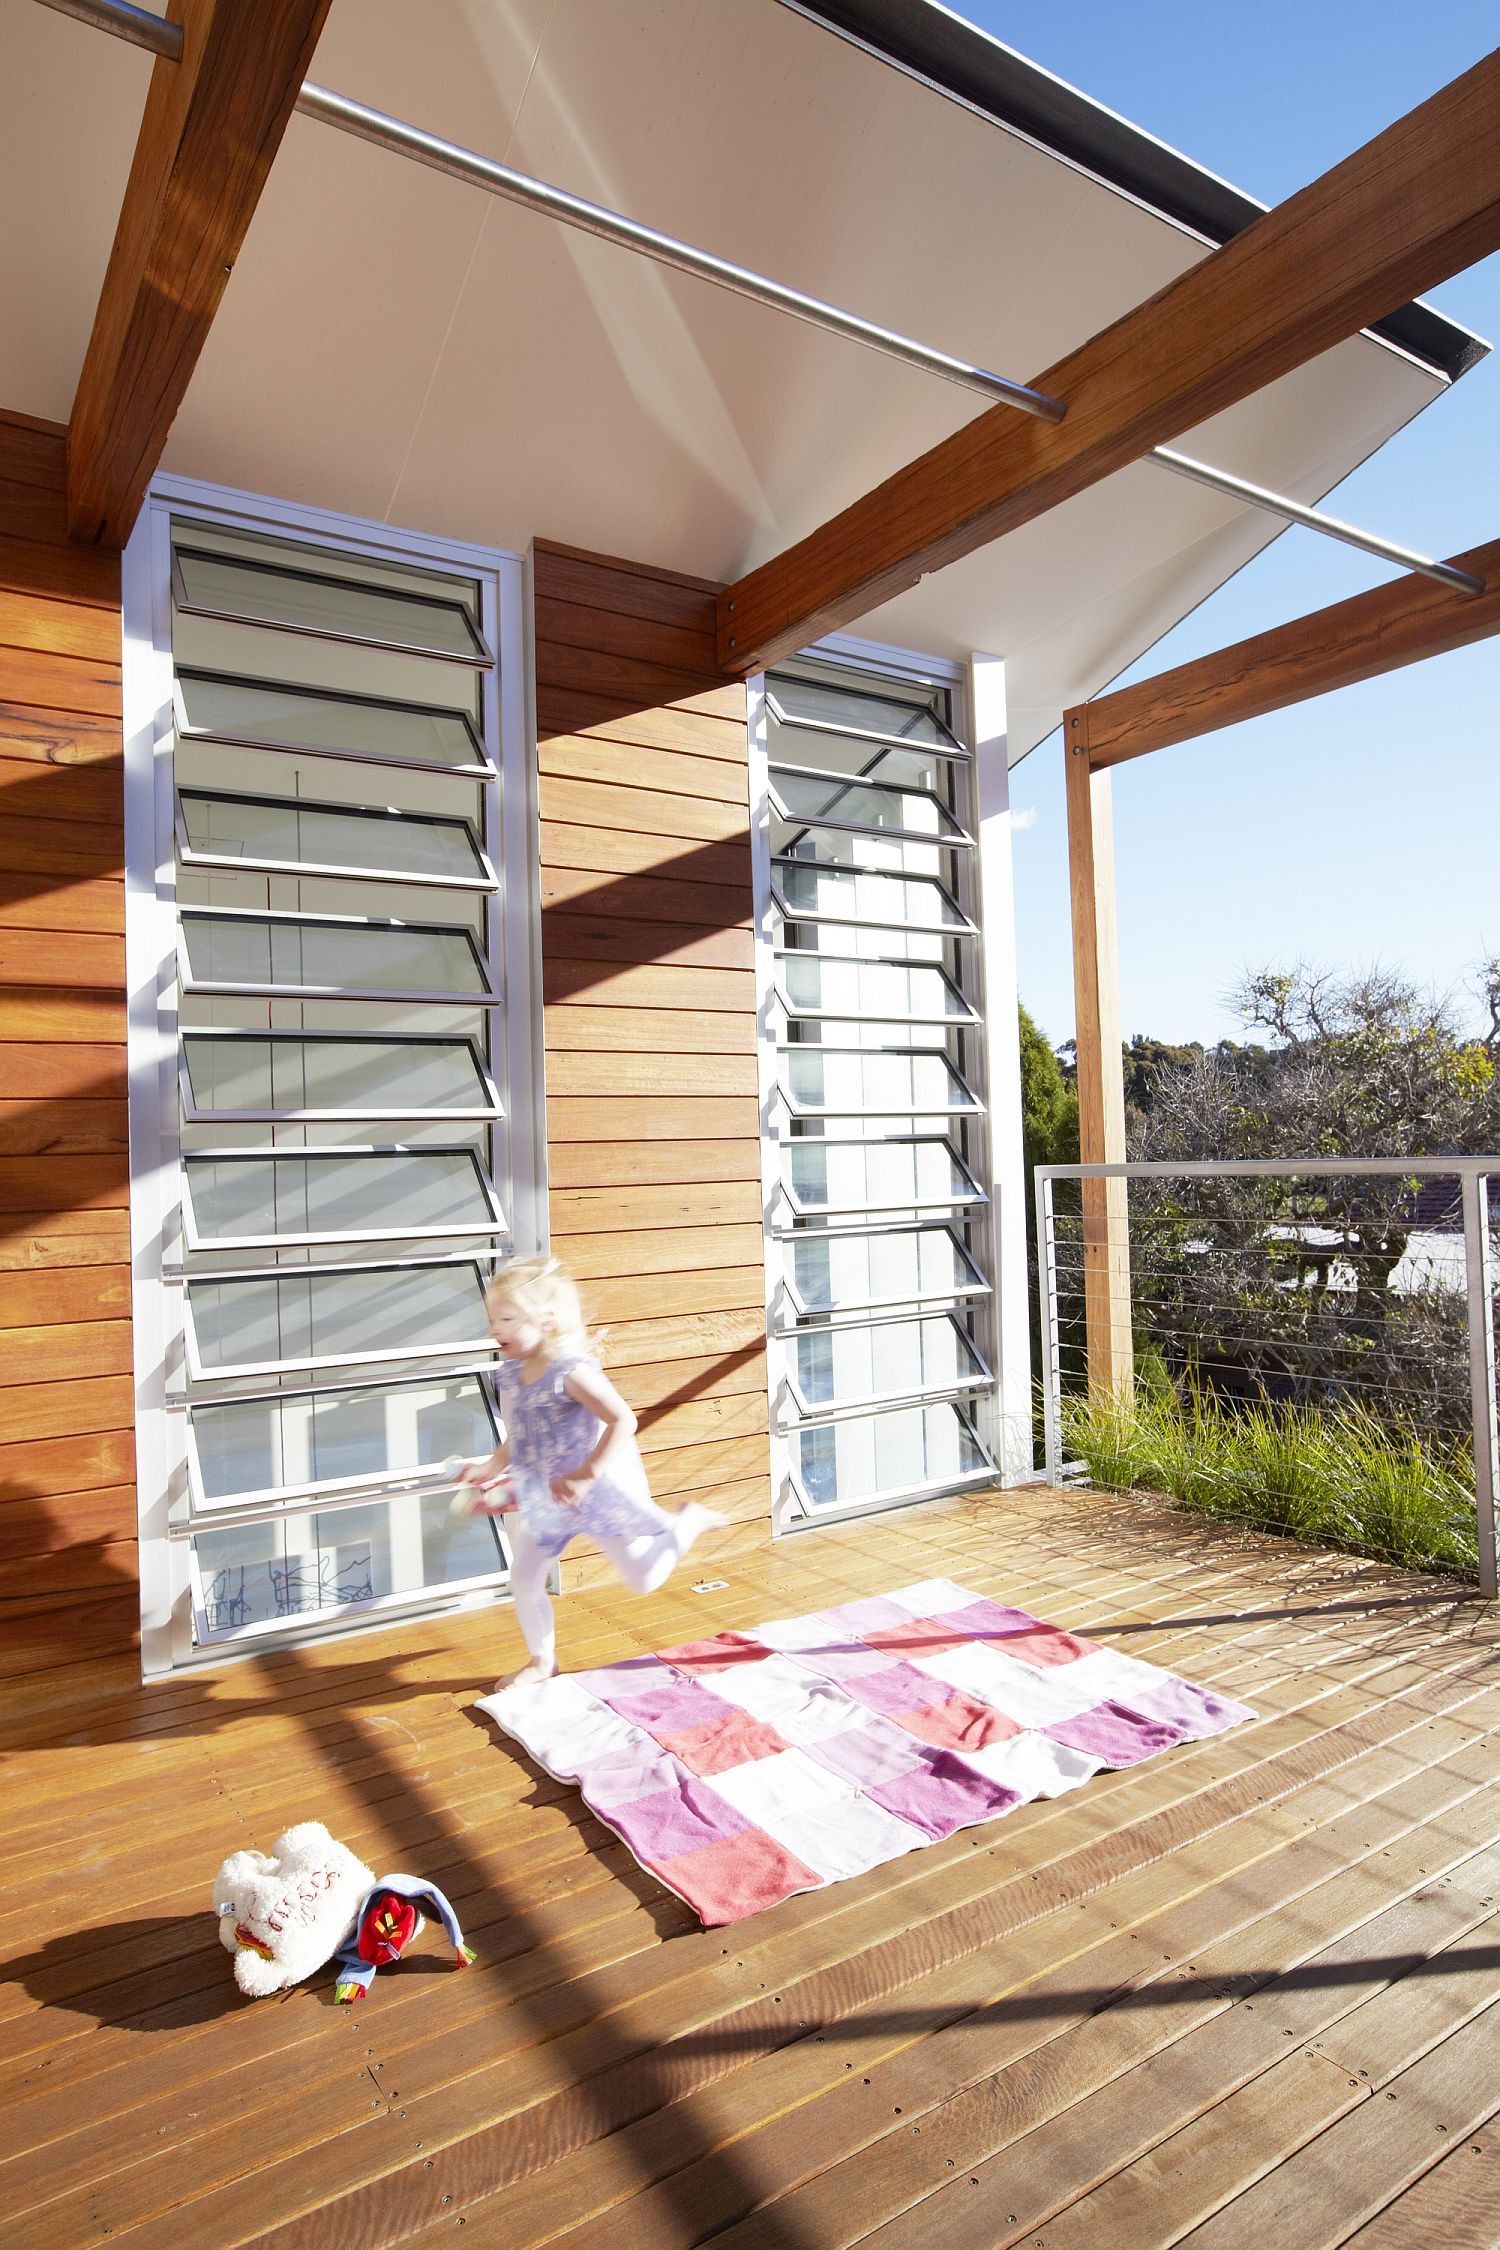 Moving roof offers shade to those on the deck when needed